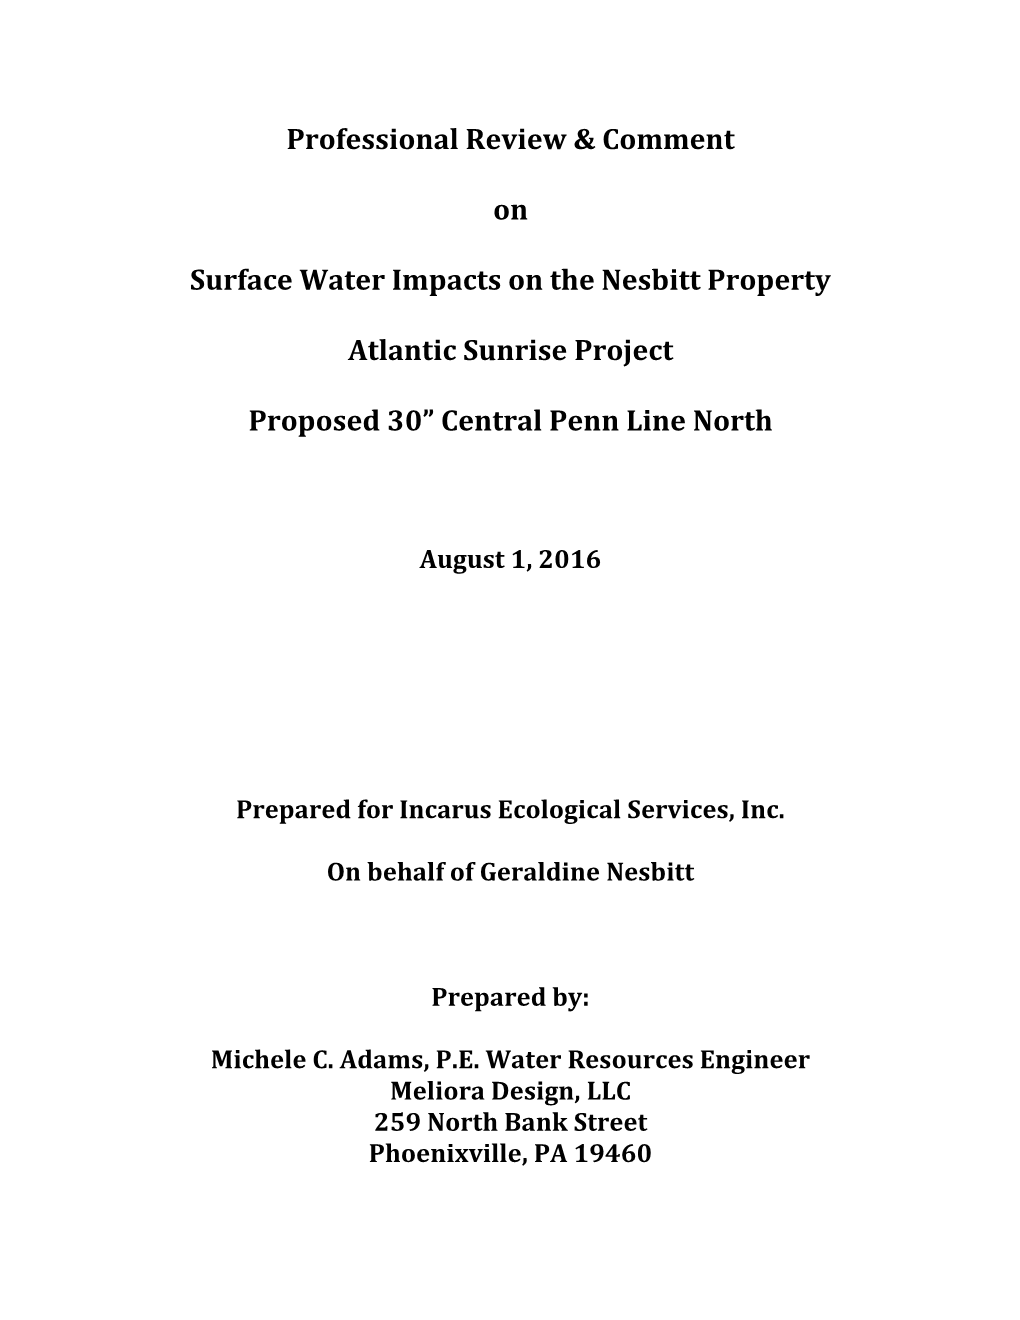 Professional Review & Comment on Surface Water Impacts on The